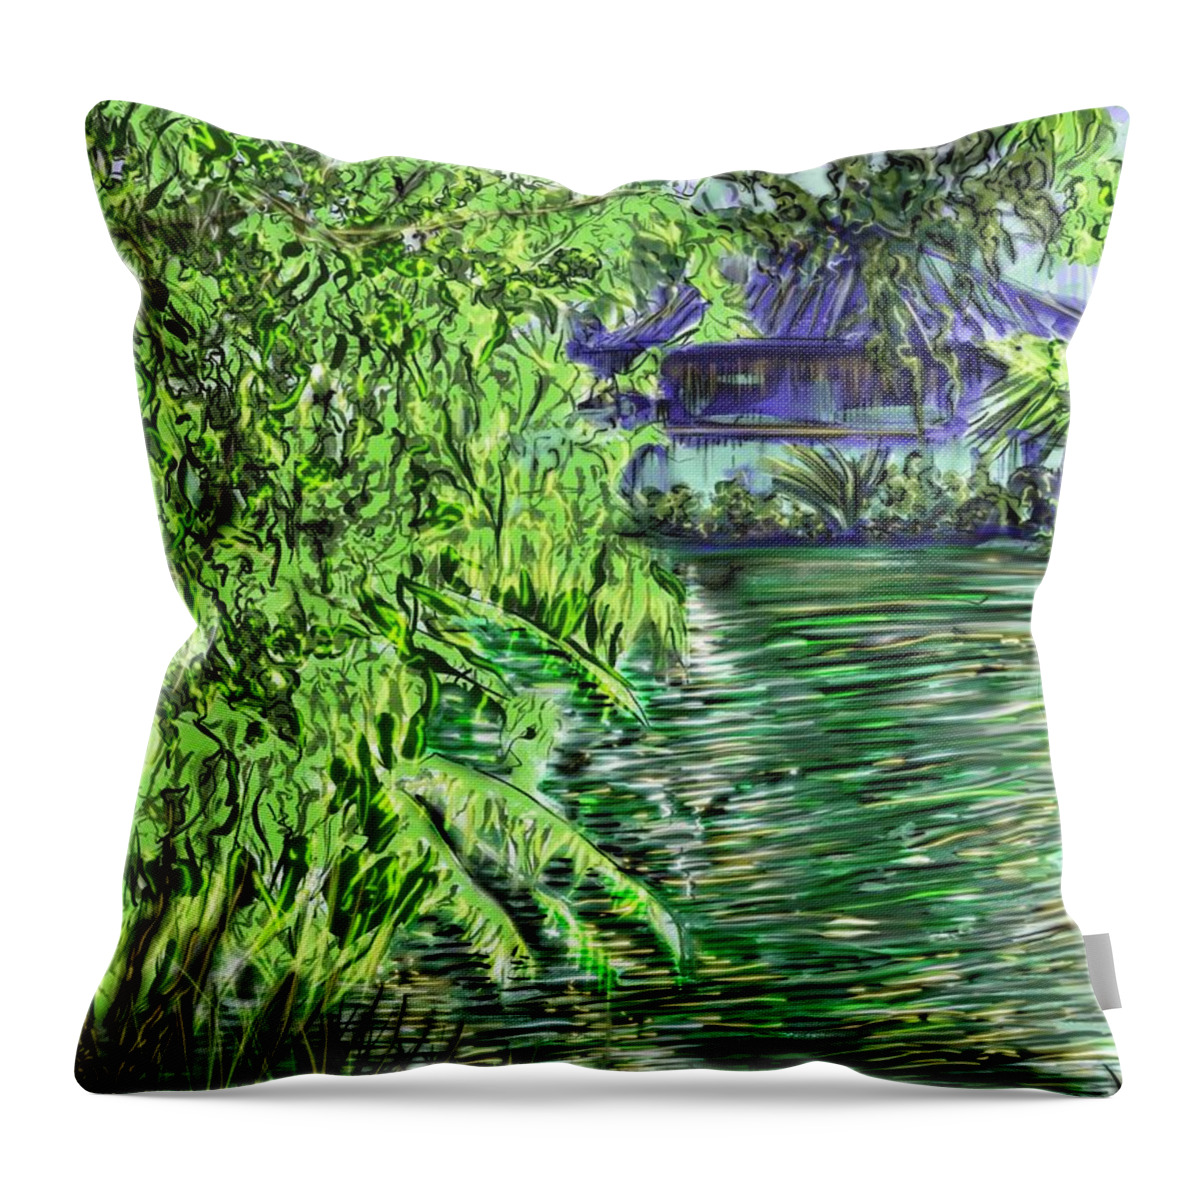 Lake Throw Pillow featuring the digital art Quiet Reflection, Elmendorf Lake by Angela Weddle